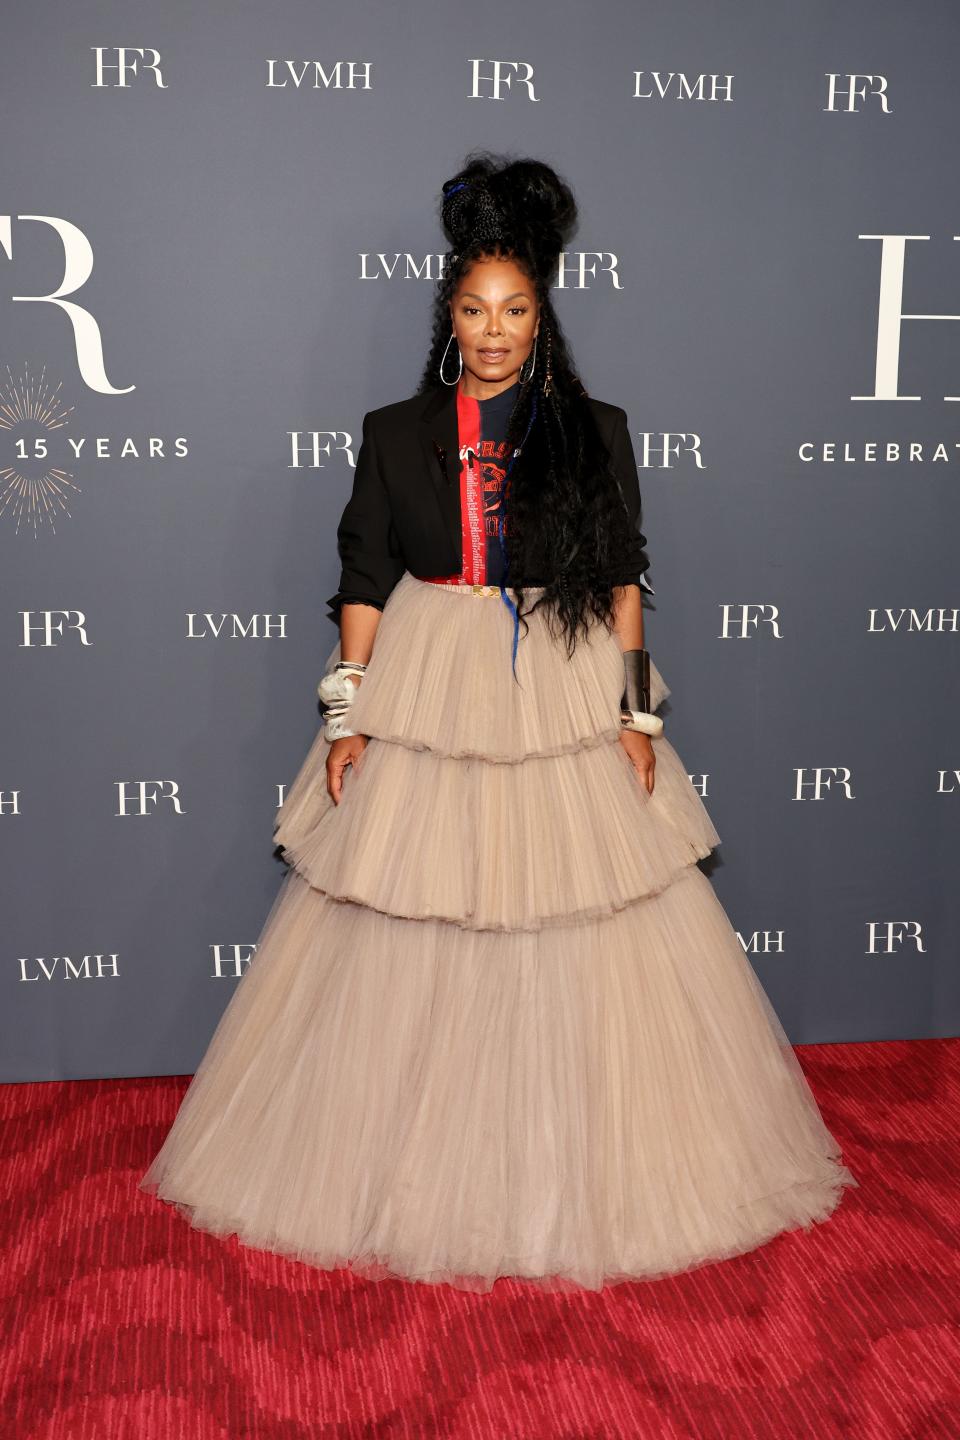 Janet Jackson attends the Harlem's Fashion Row 15th Anniversary Fashion Show And Style Awards After Party on Sept. 6, 2022, in New York City.